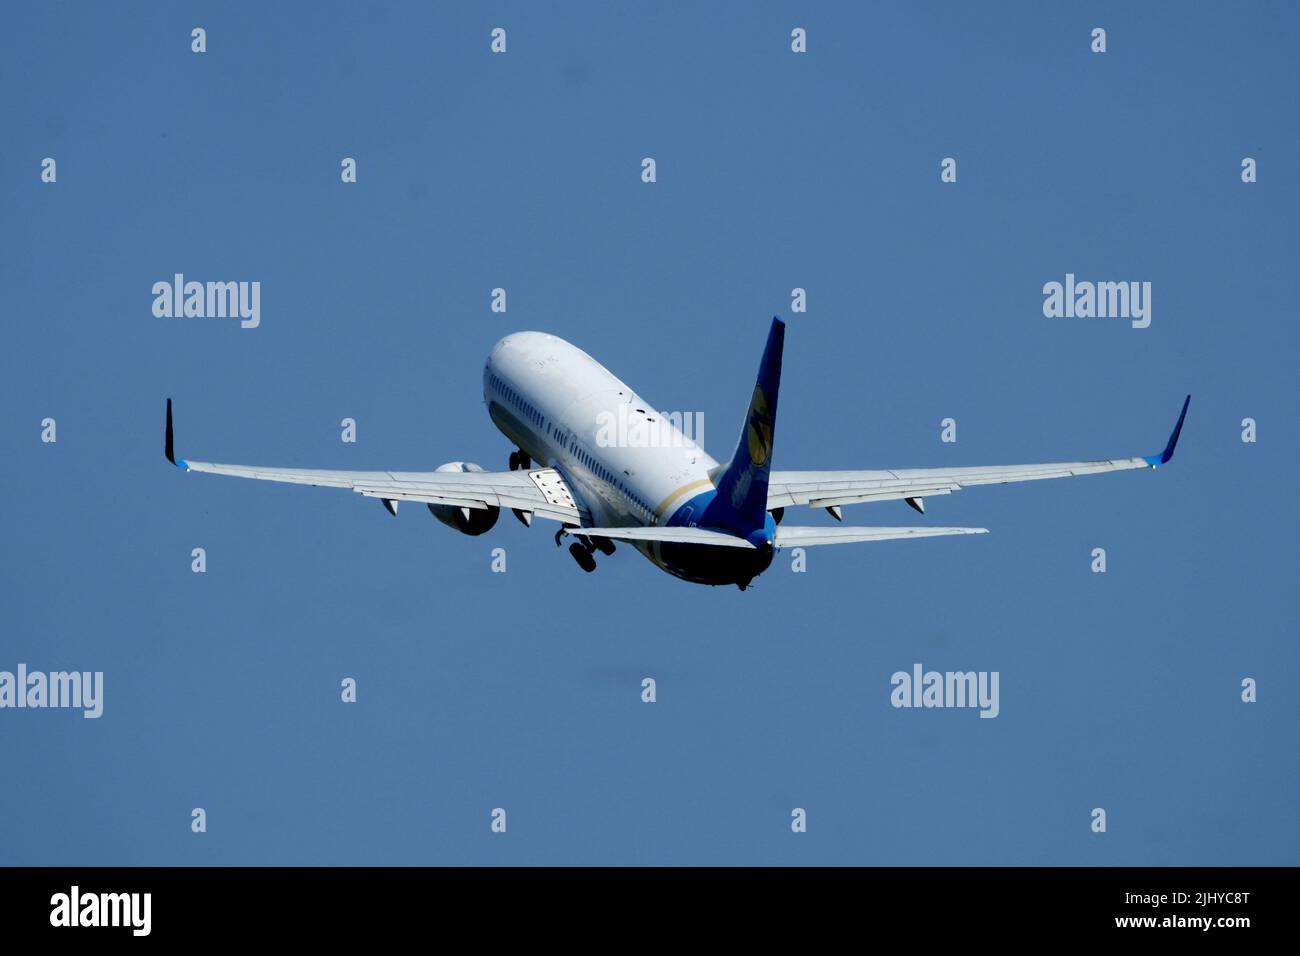 Ukraine International Airlines aircraft Boeing 737-9KV takes off from Riga International Airport, Latvia July 21, 2022. REUTERS/Ints Kalnins Stock Photo